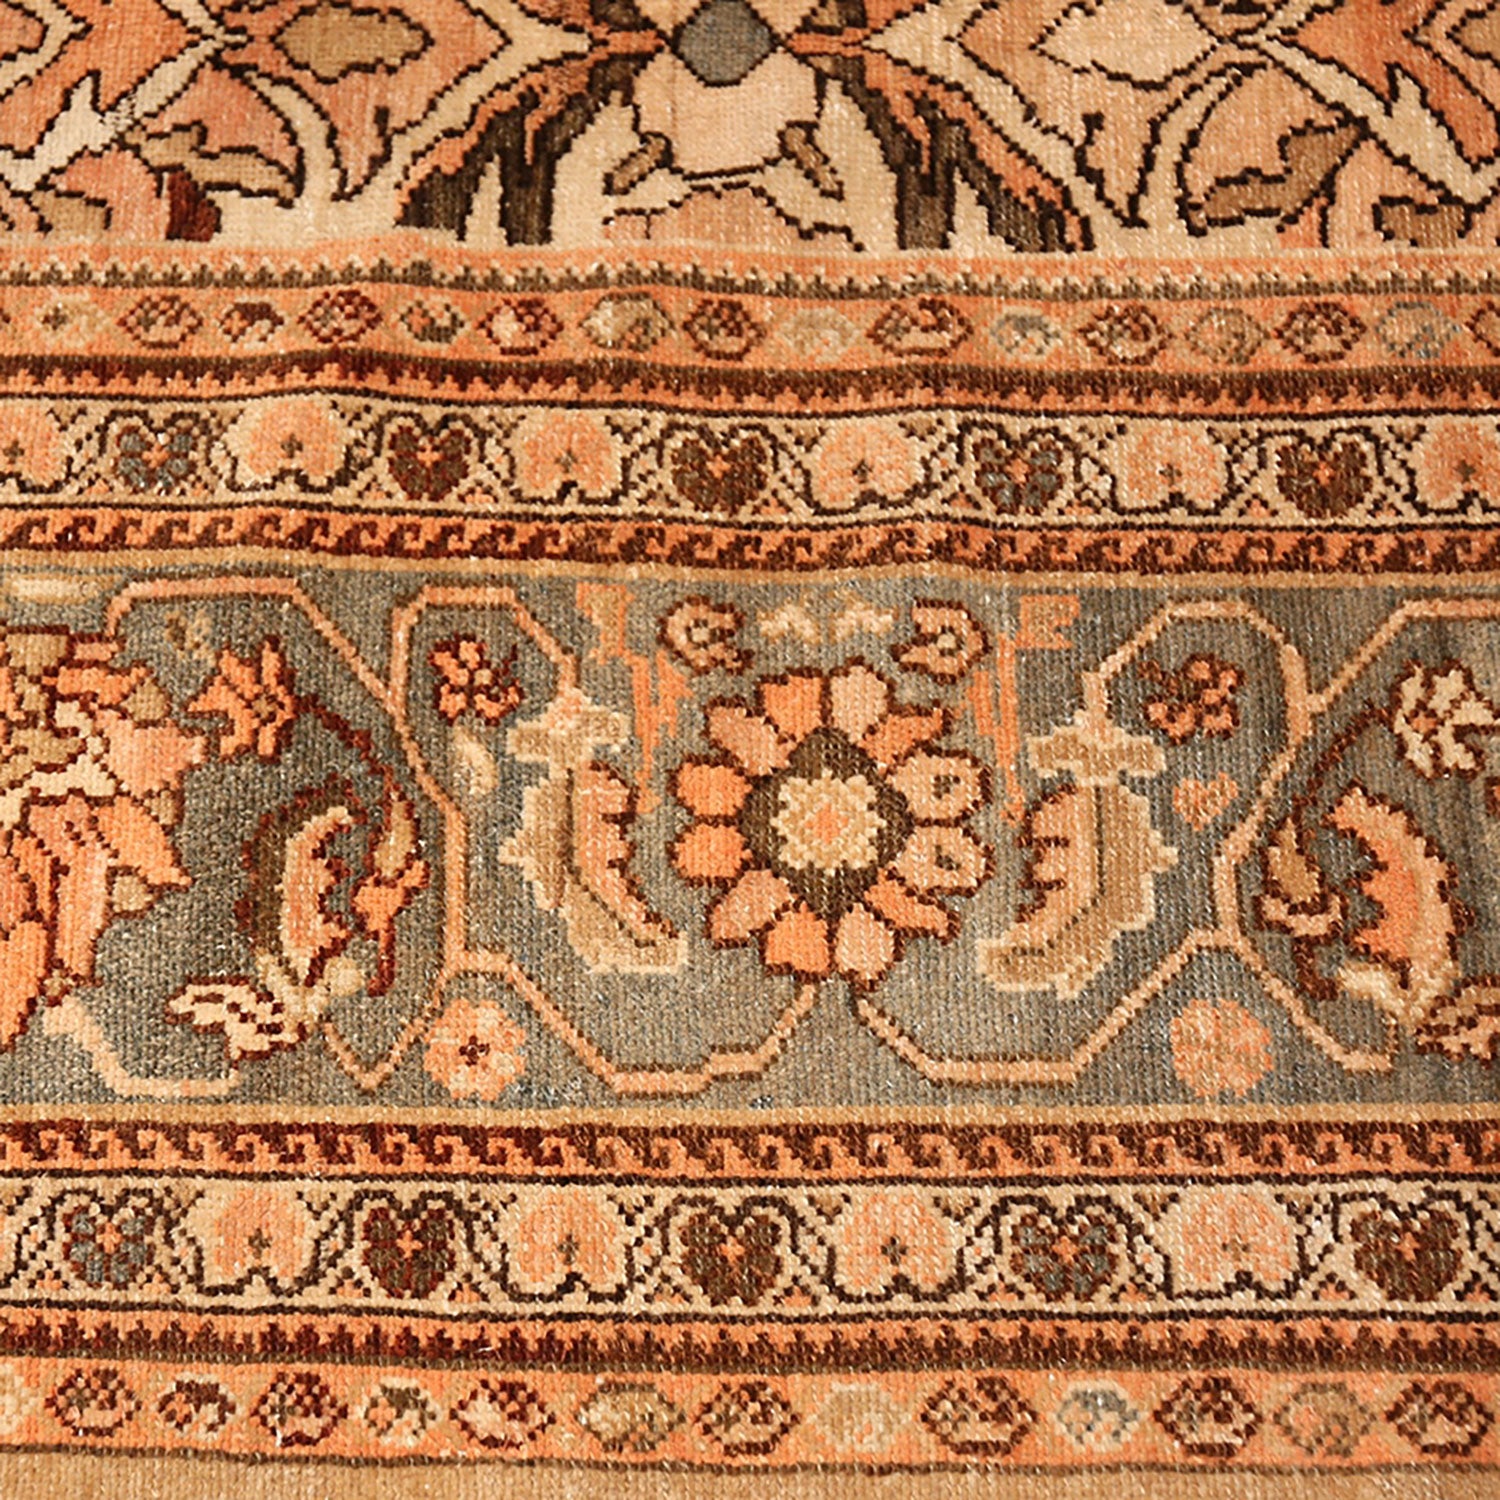 An intricately designed handwoven rug featuring traditional motifs and warm earthy tones.